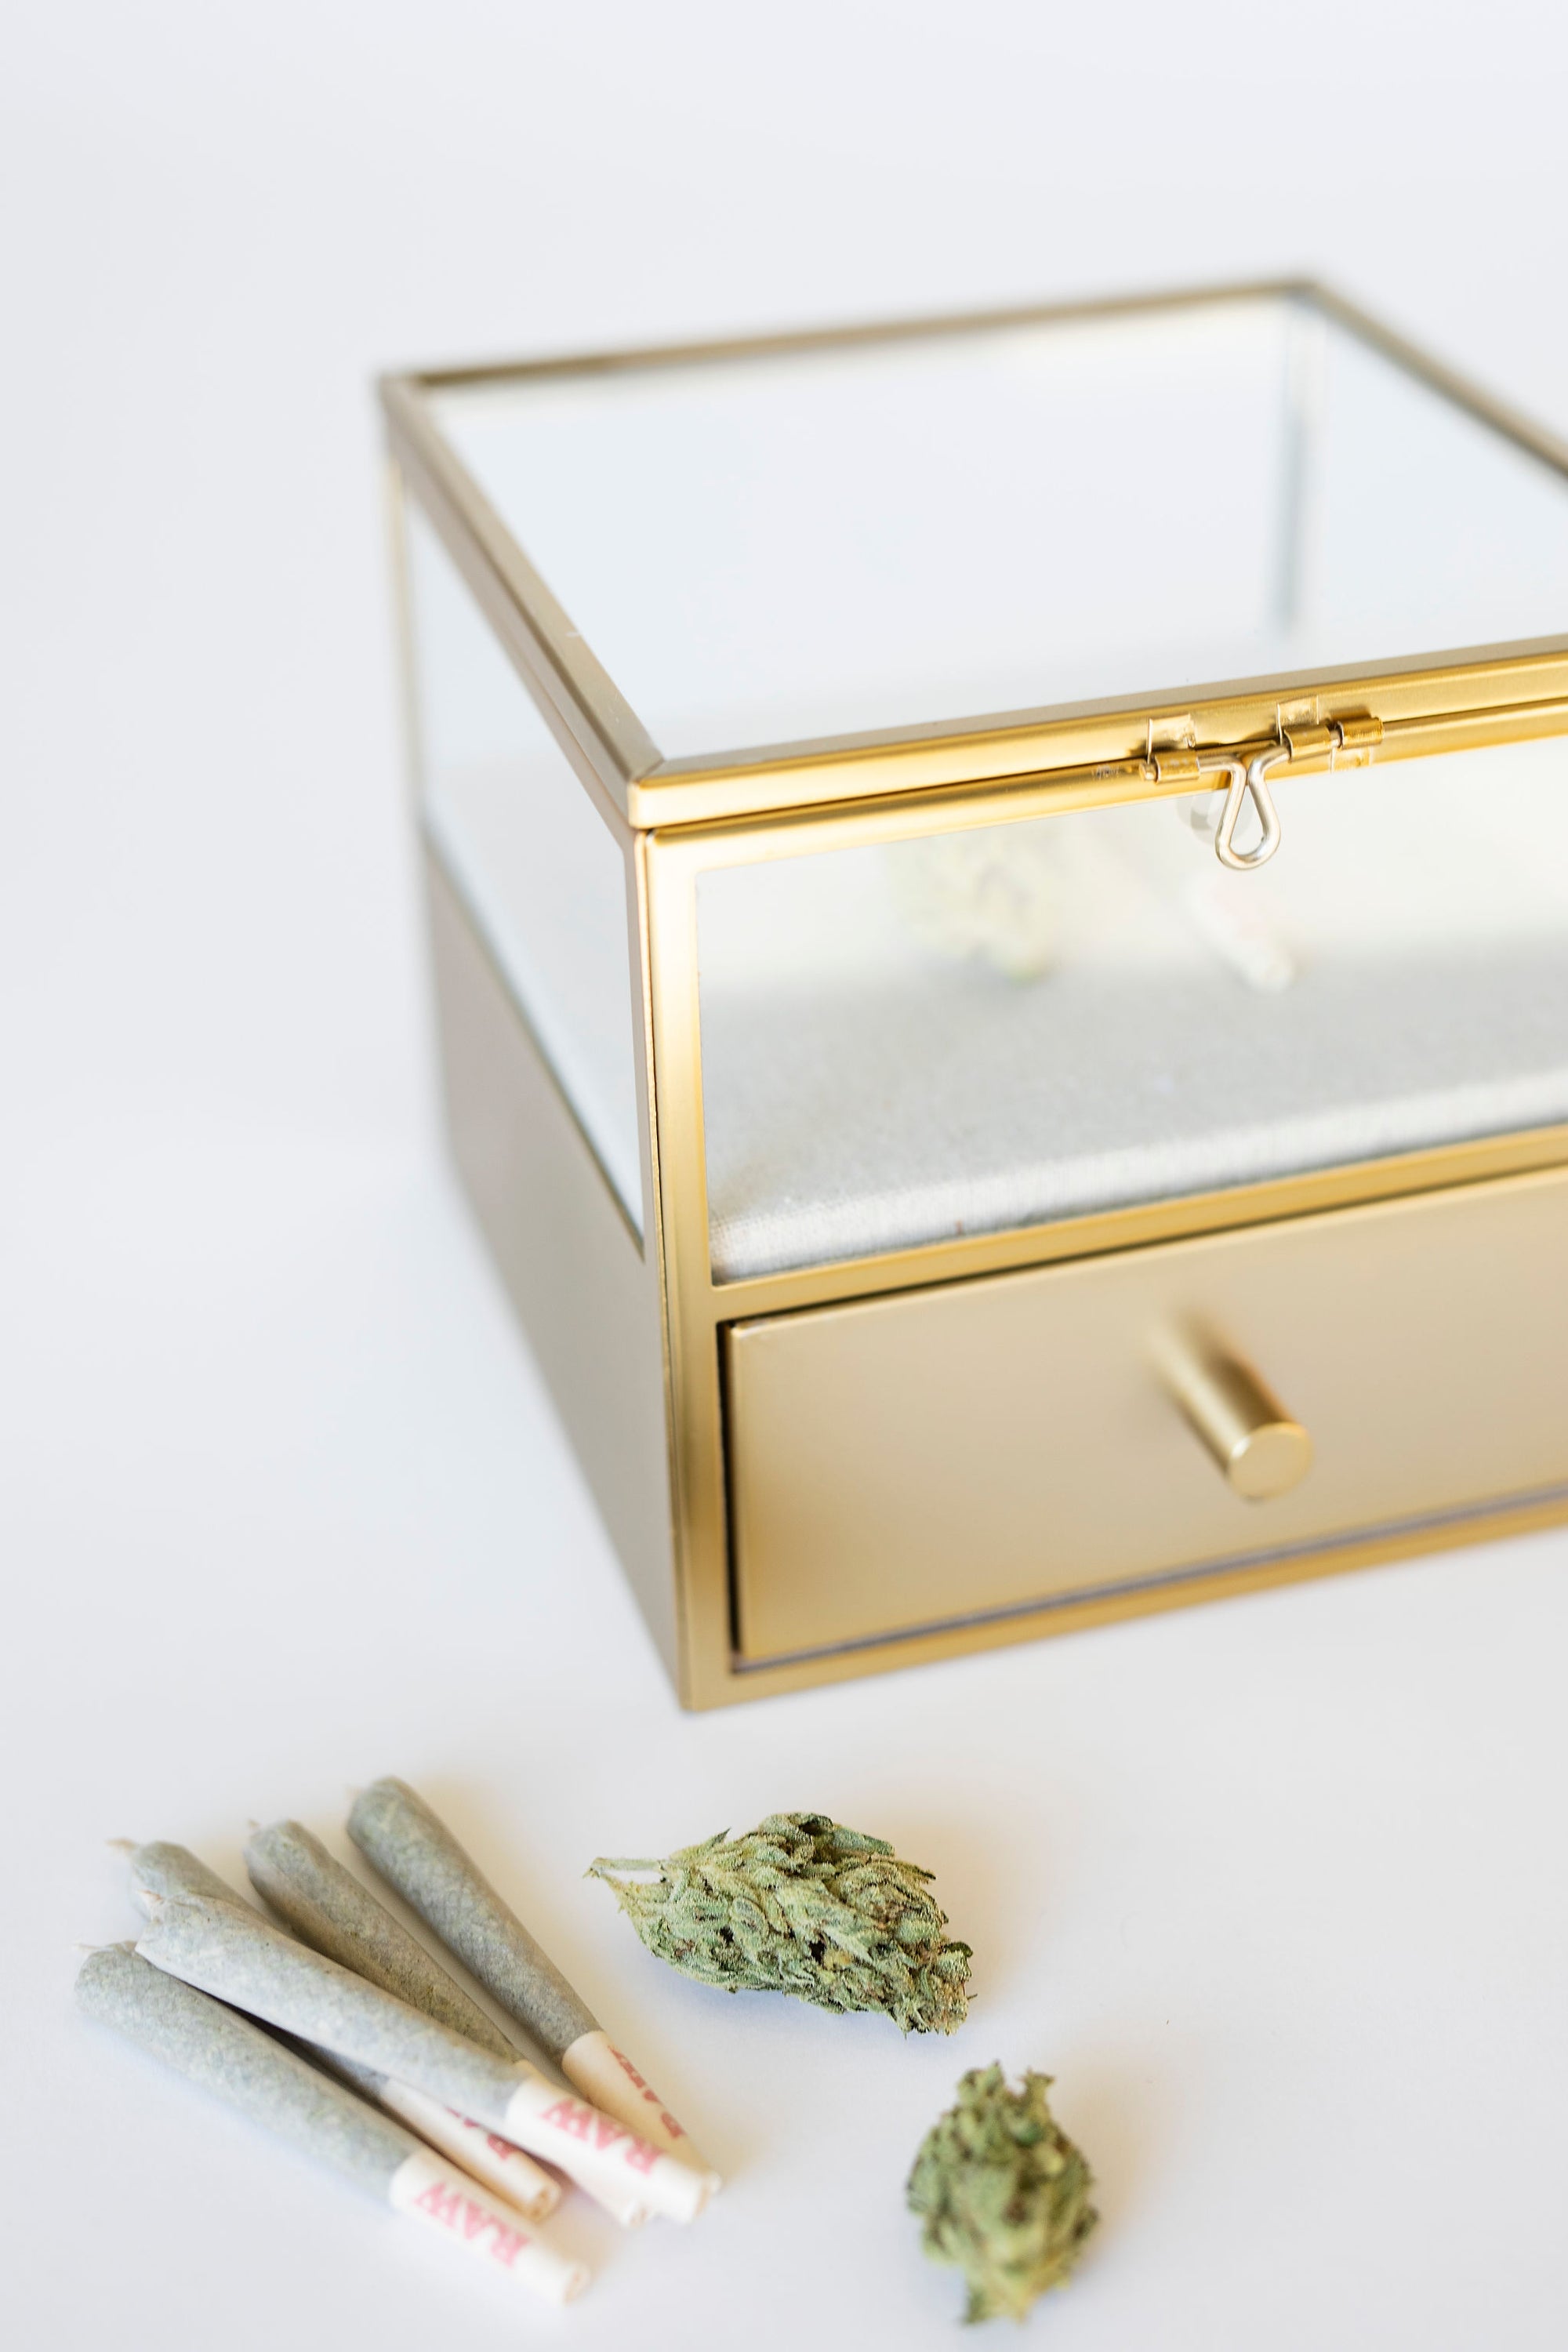 12 Days of Cannabis Gifting: Day 2 The Gift of Flower